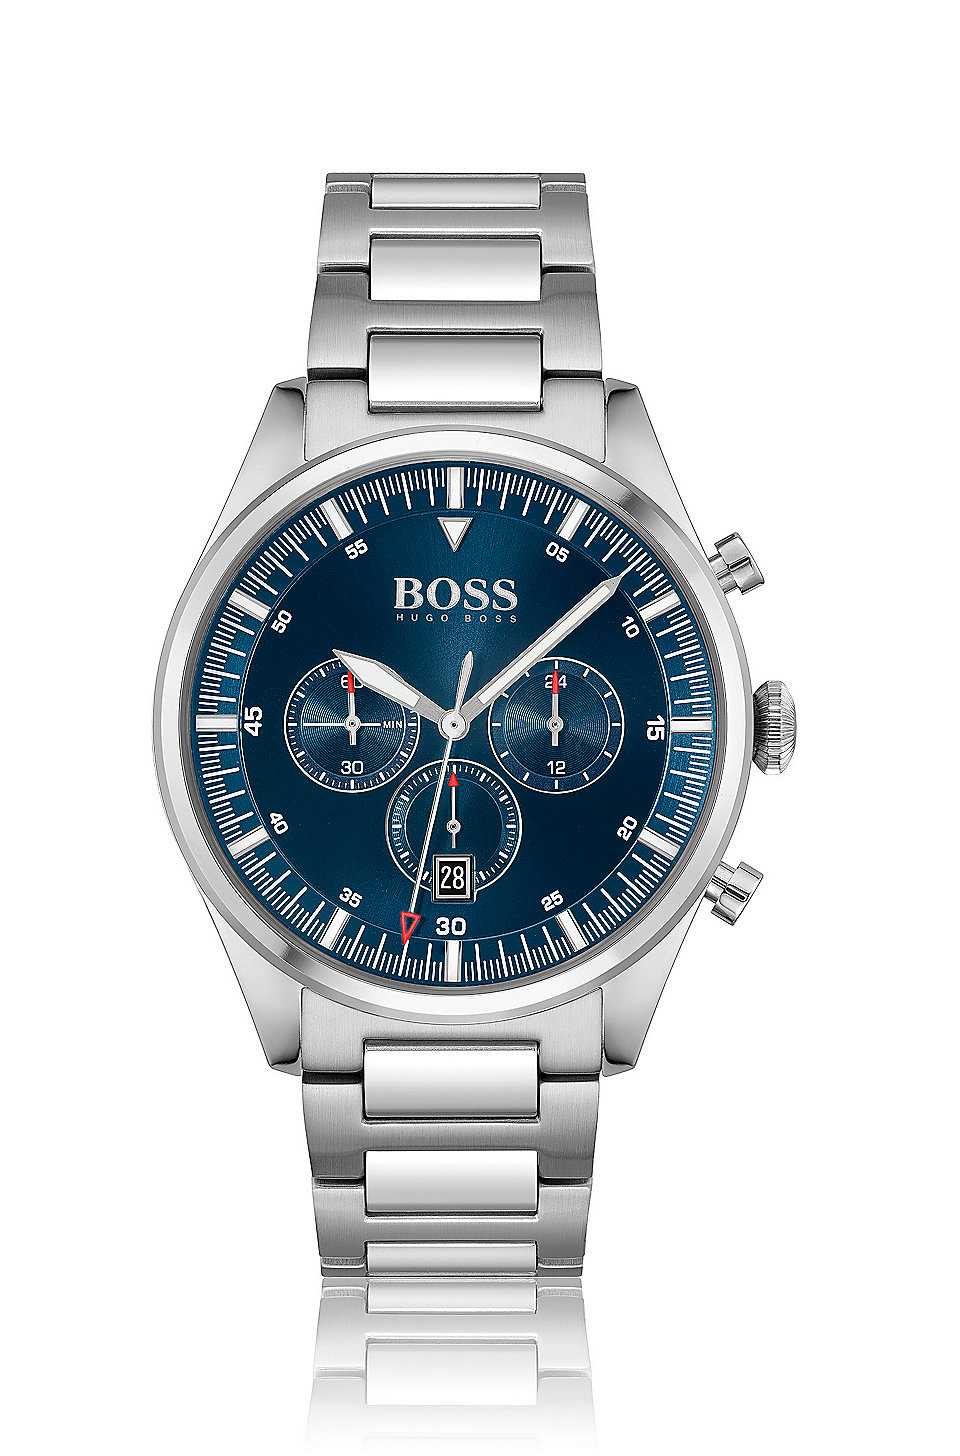 Hugo Boss Watch Silver With Blue Face Sale Price, Save 67% | jlcatj.gob.mx